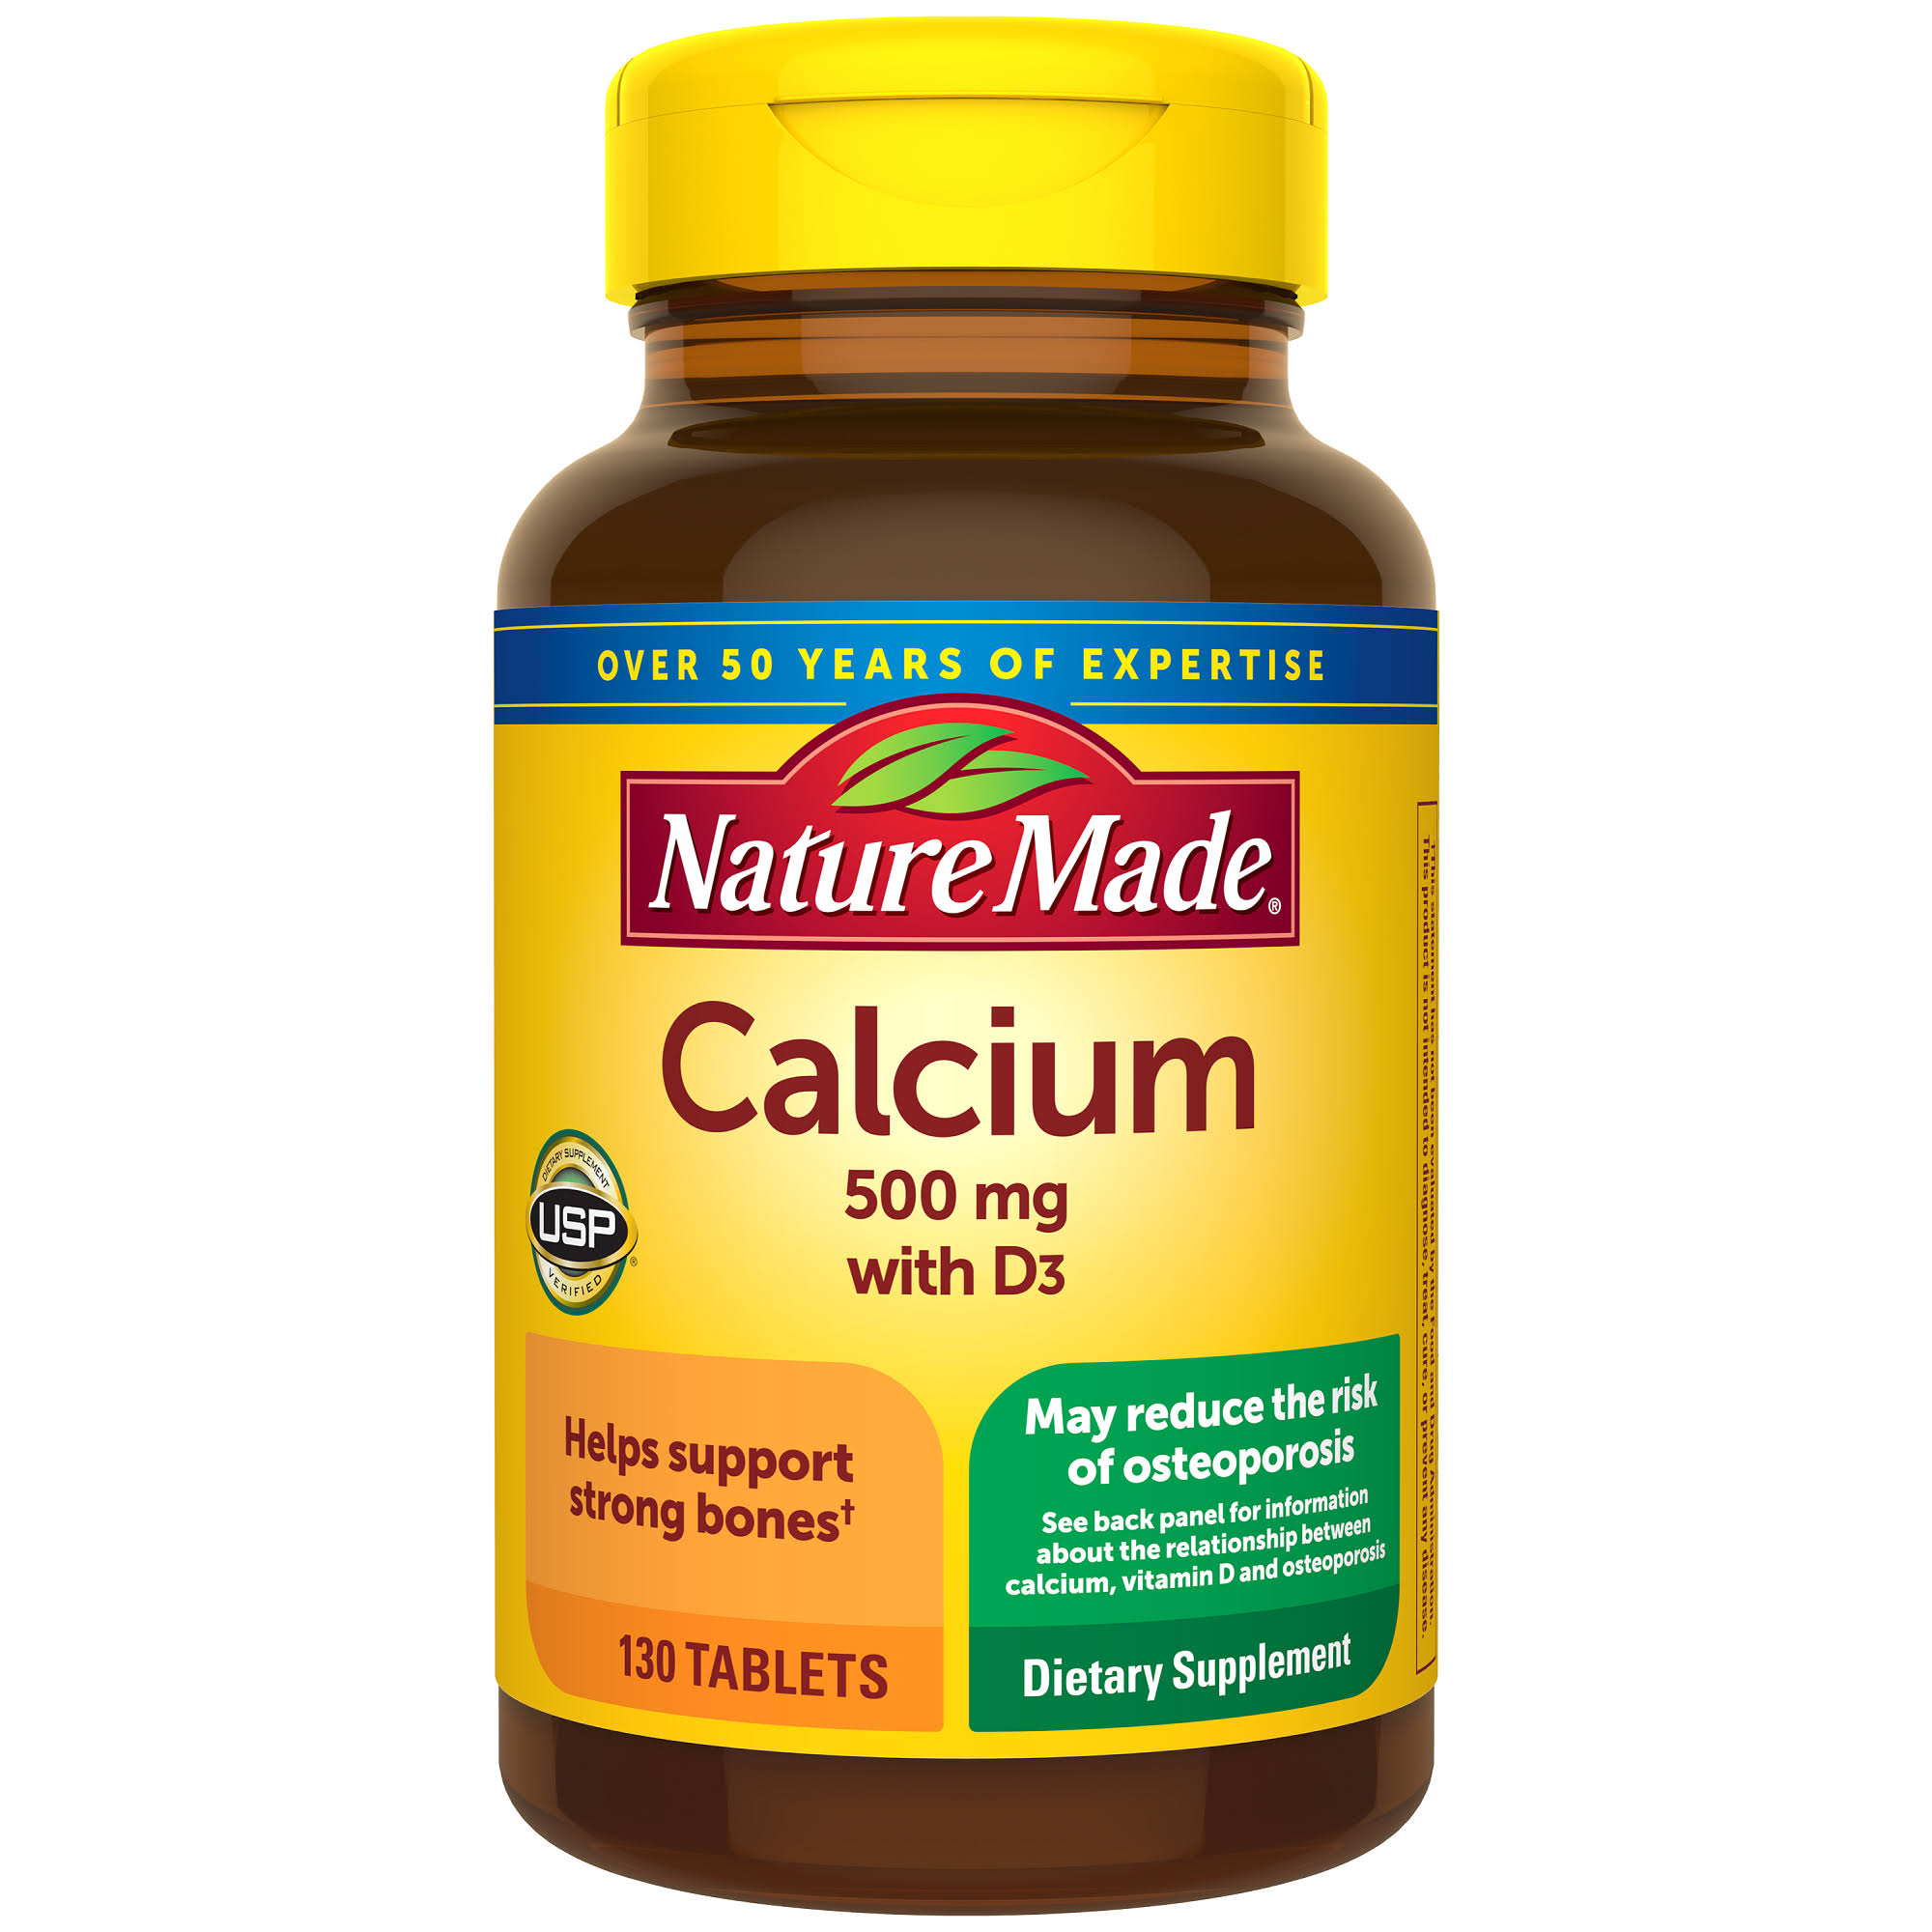 Nature Made Calcium 500 Mg and Vitamin D Tablets